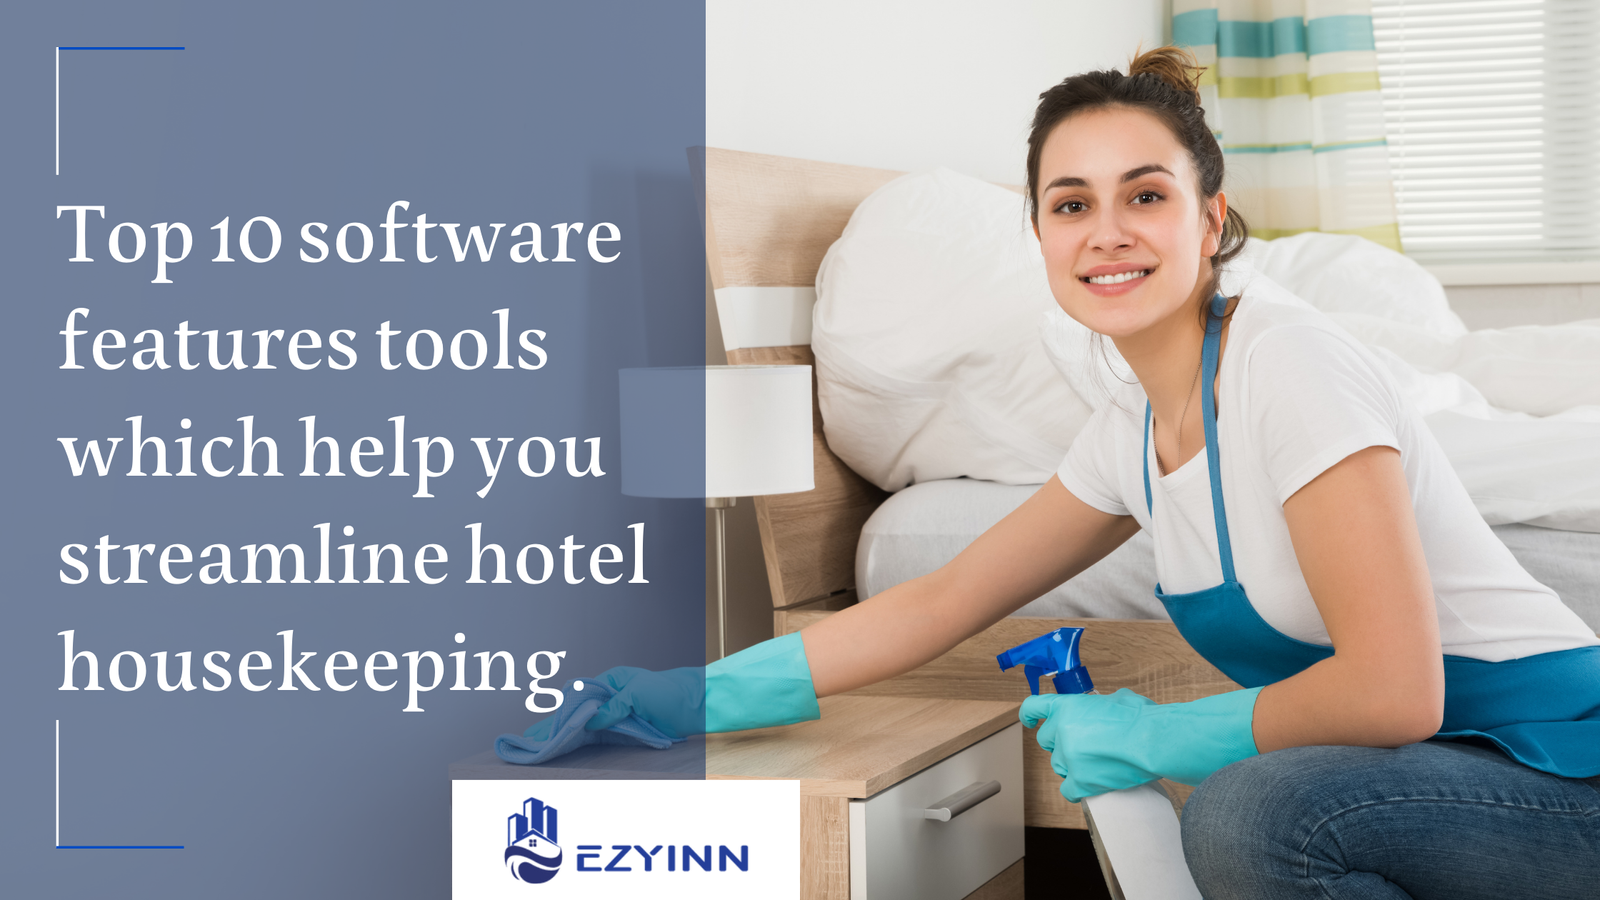 Top 10 software features tools which help you streamline hotel housekeeping. | Ezyinn PMS